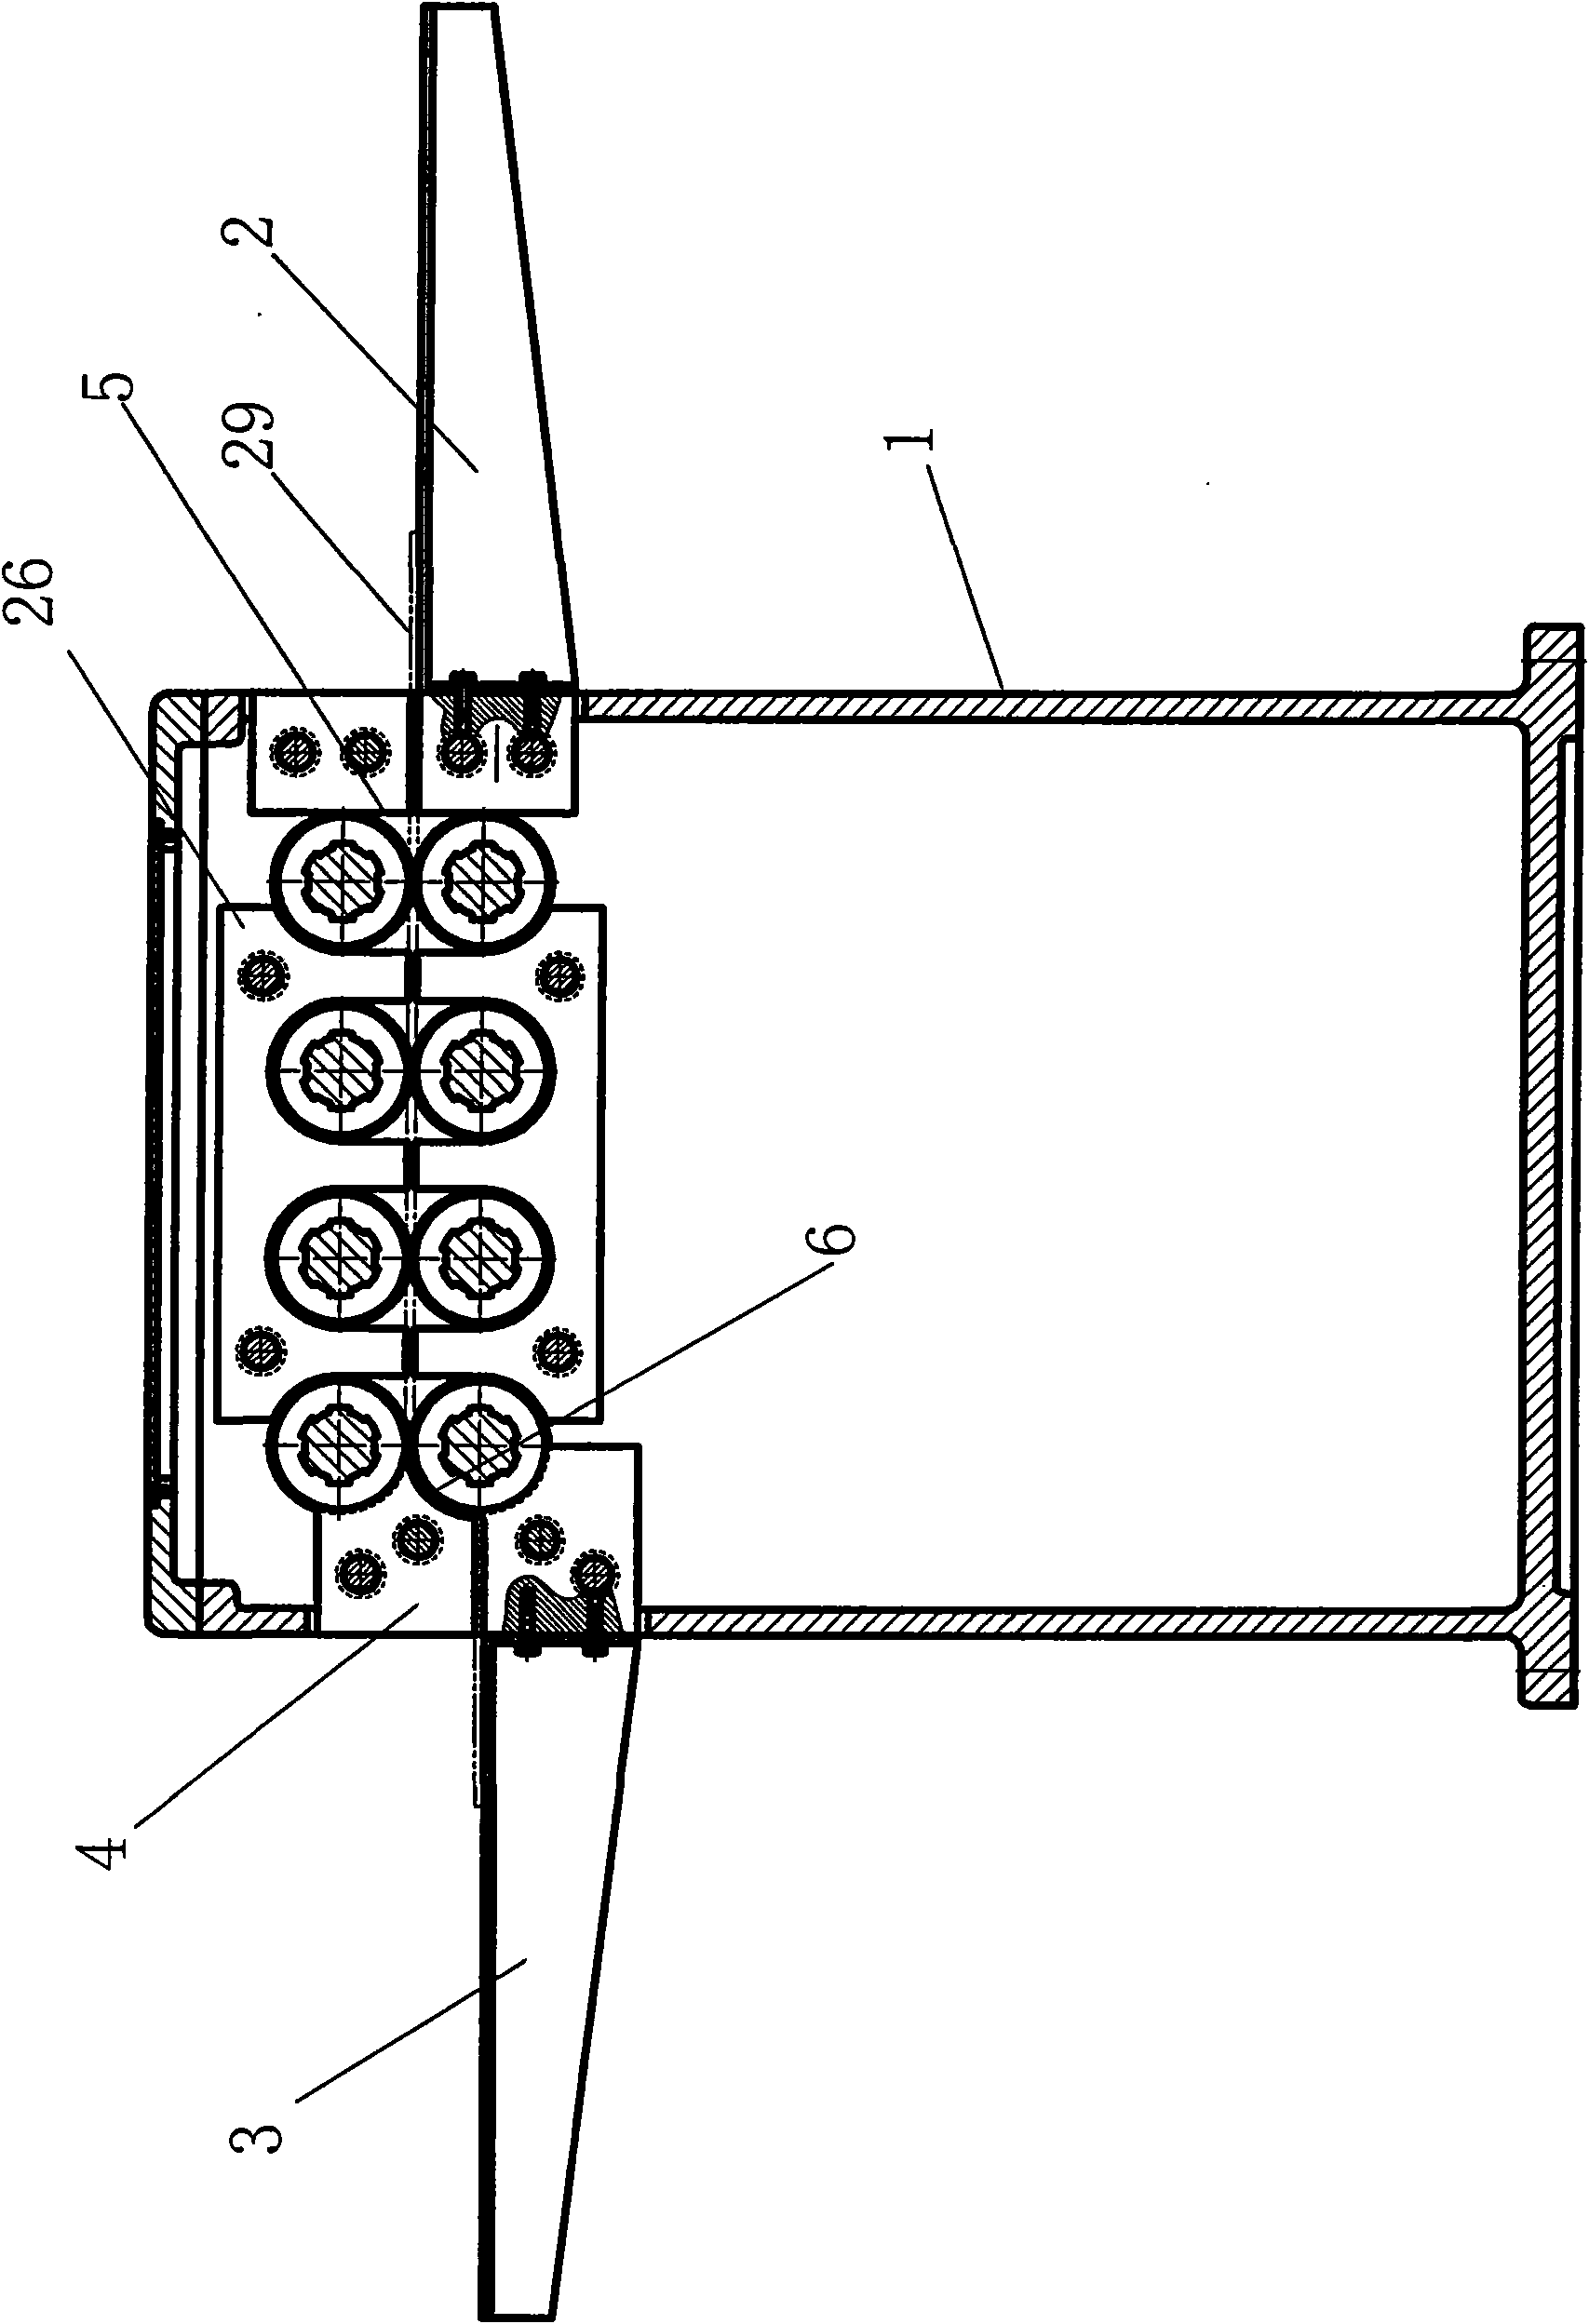 Continuous drive type equal channel angular pressing texturing processing equipment